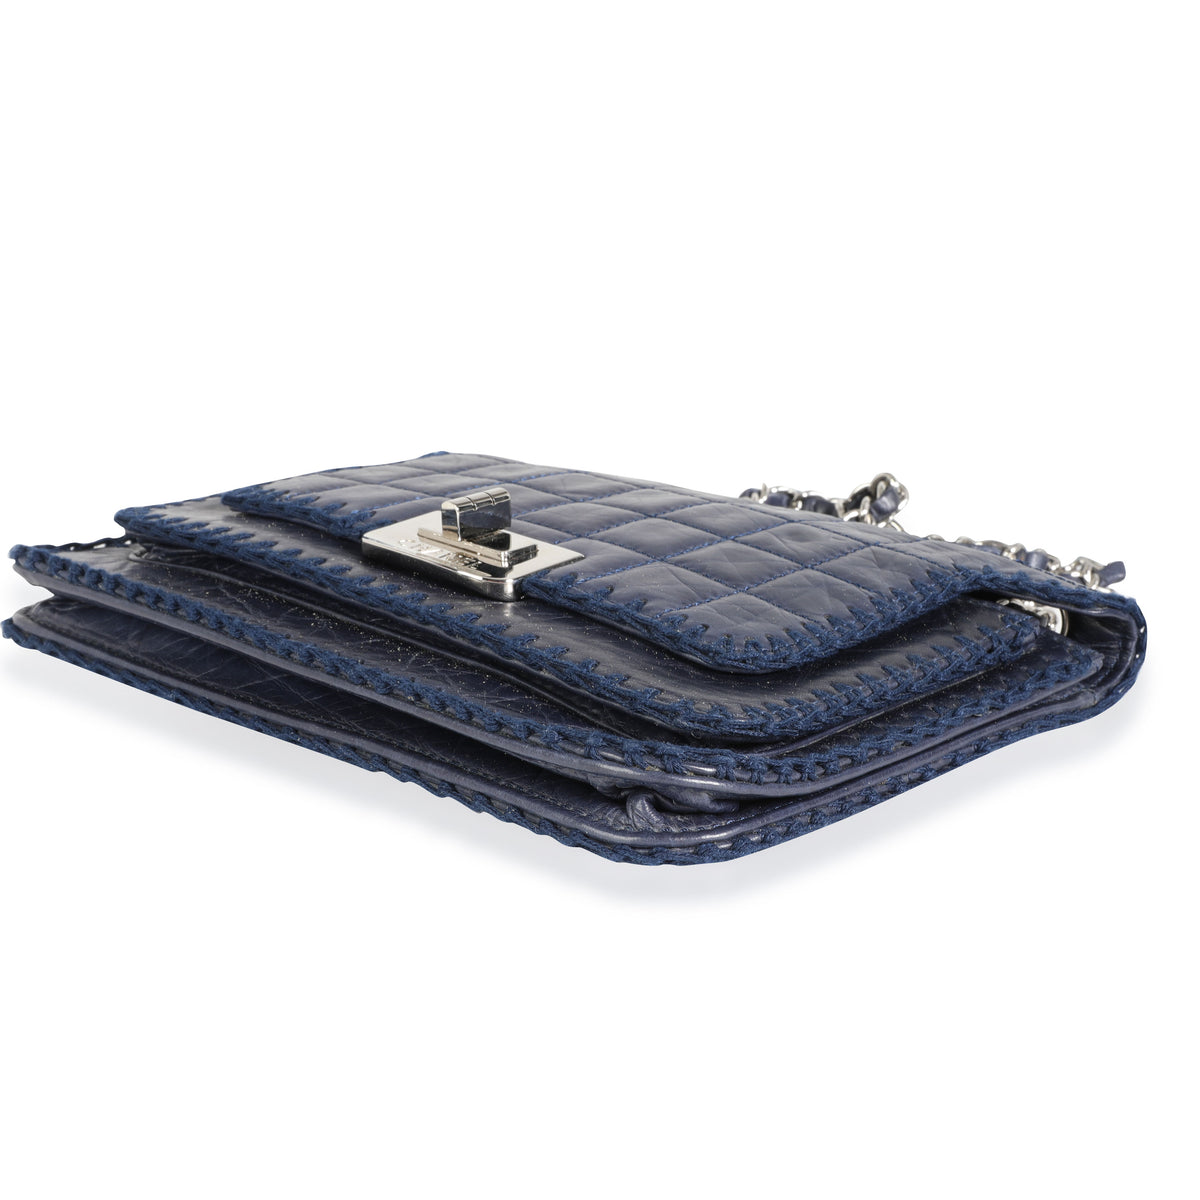 CHANEL, Bags, Chanel Limited Edition Grey With Blue Stitching